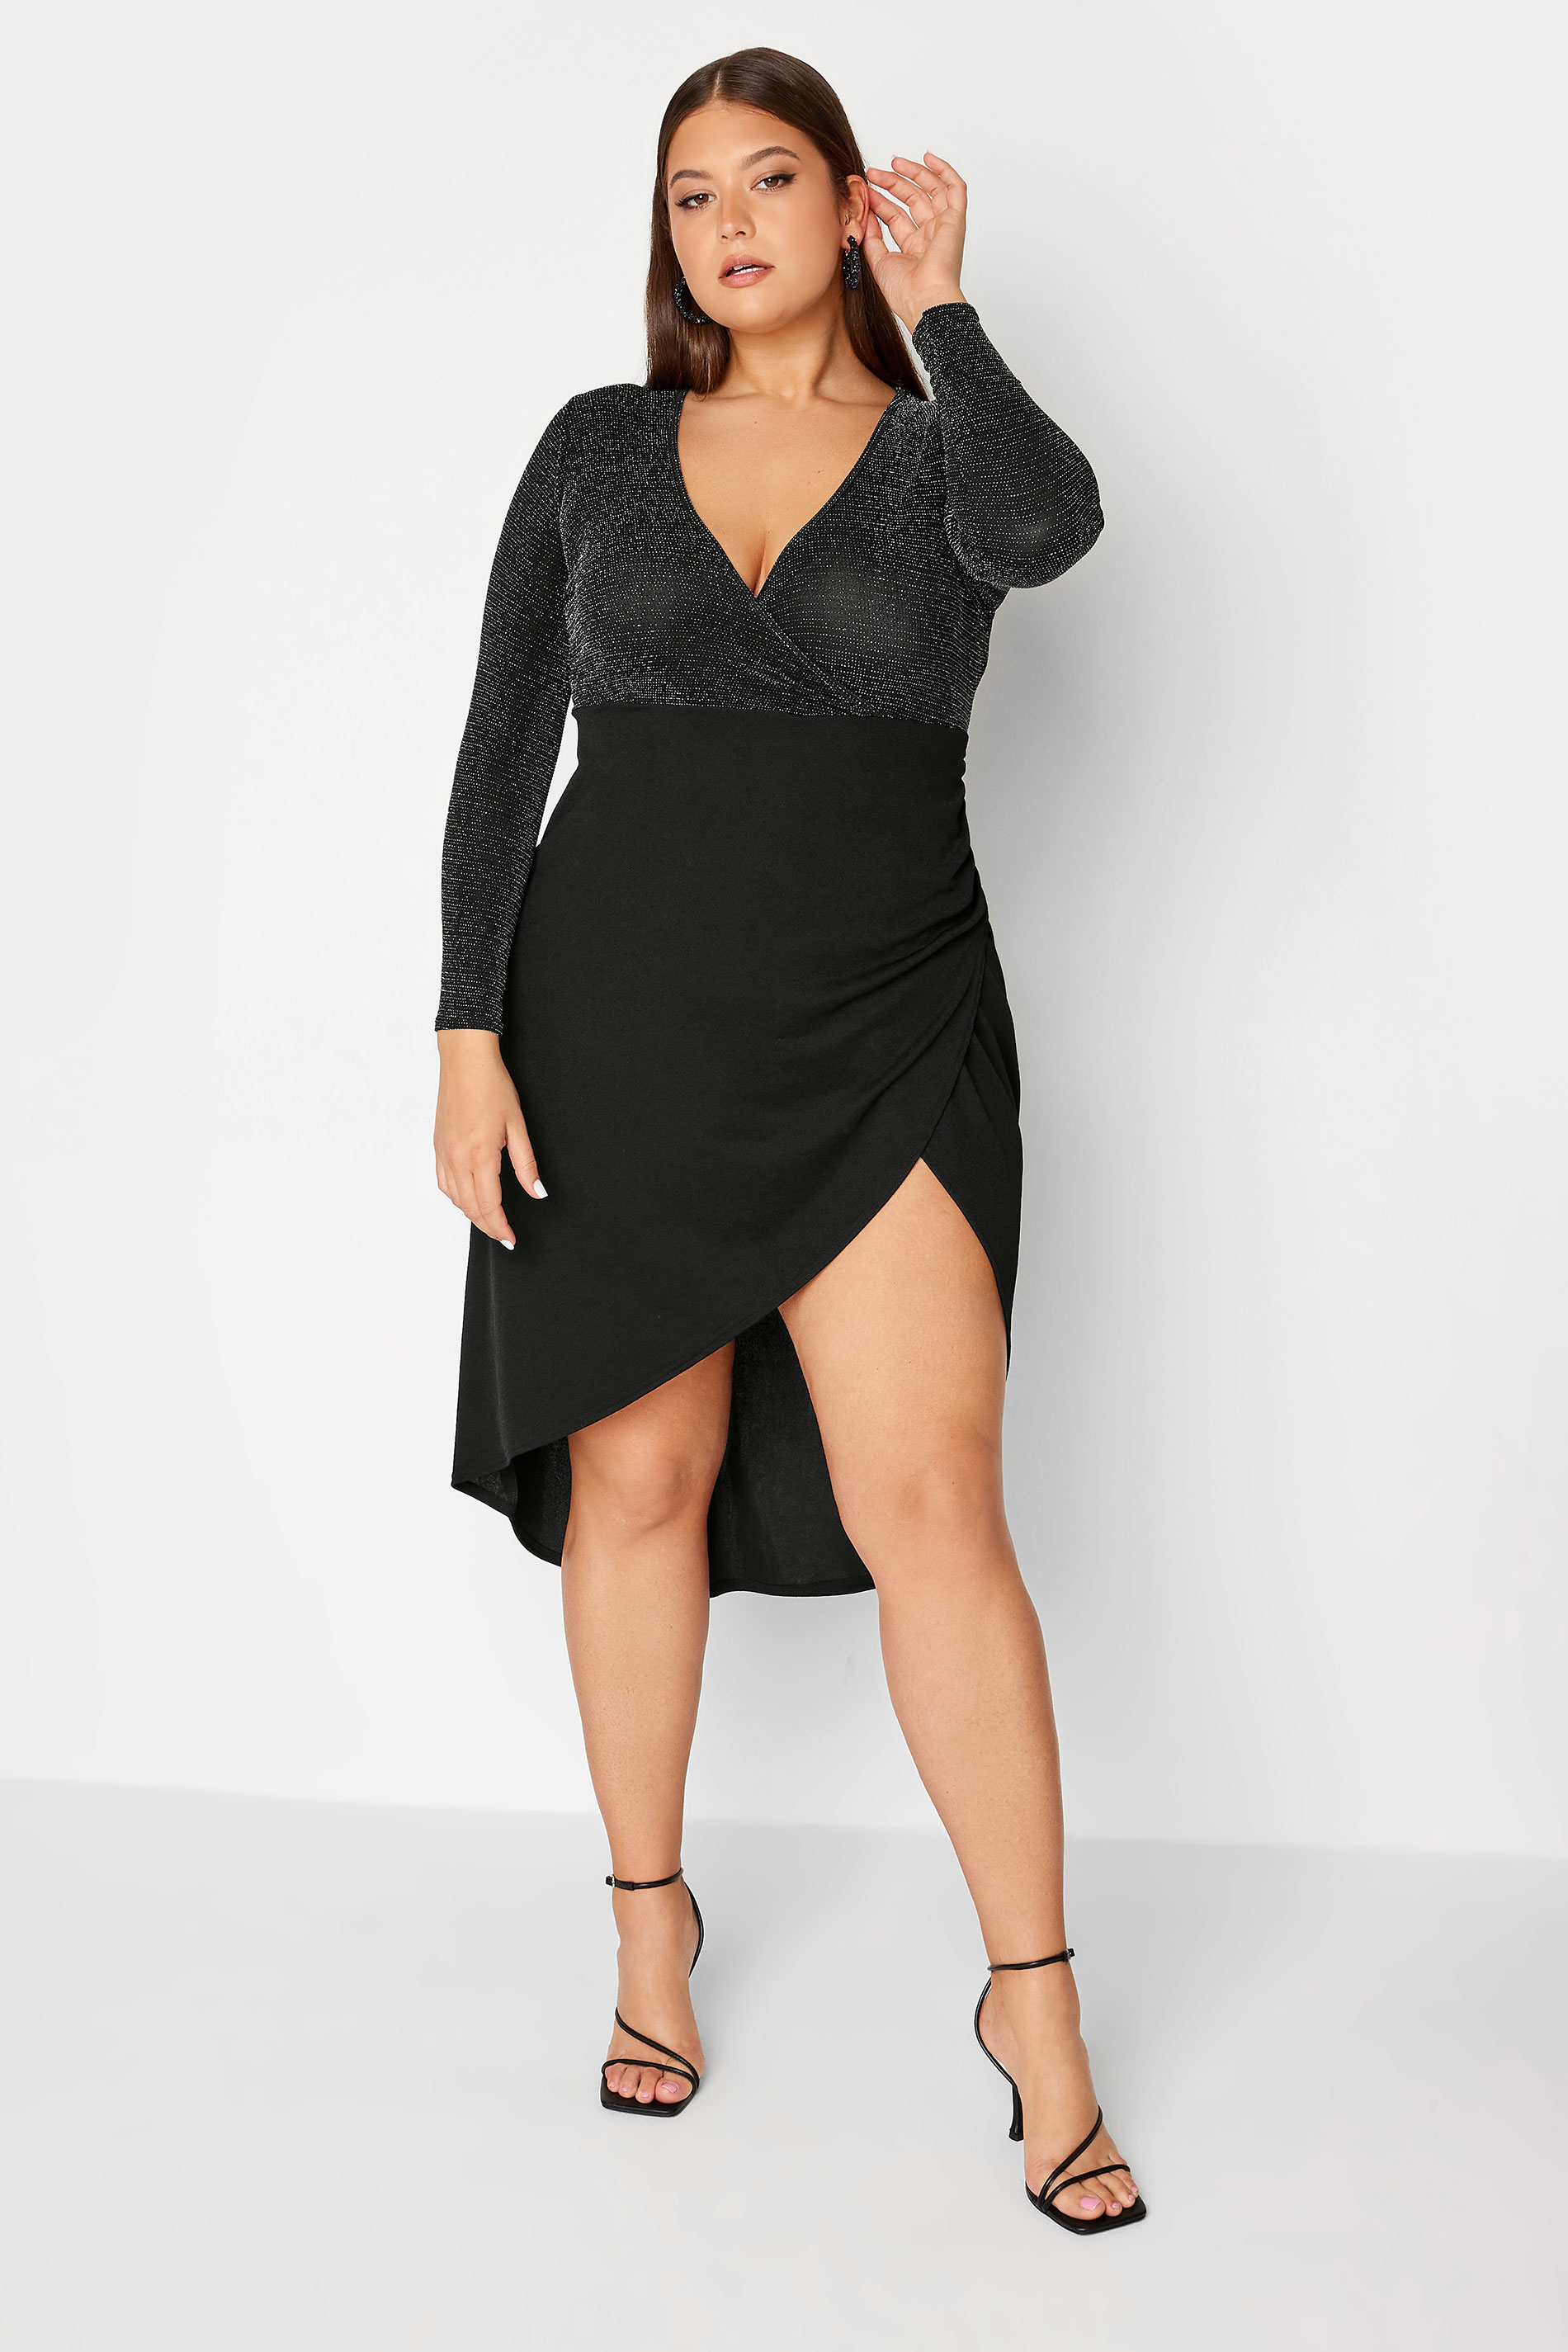 LIMITED COLLECTION Plus Size Black Multicolour Glitter Bodycon Wrap Dress | Yours Clothing 3